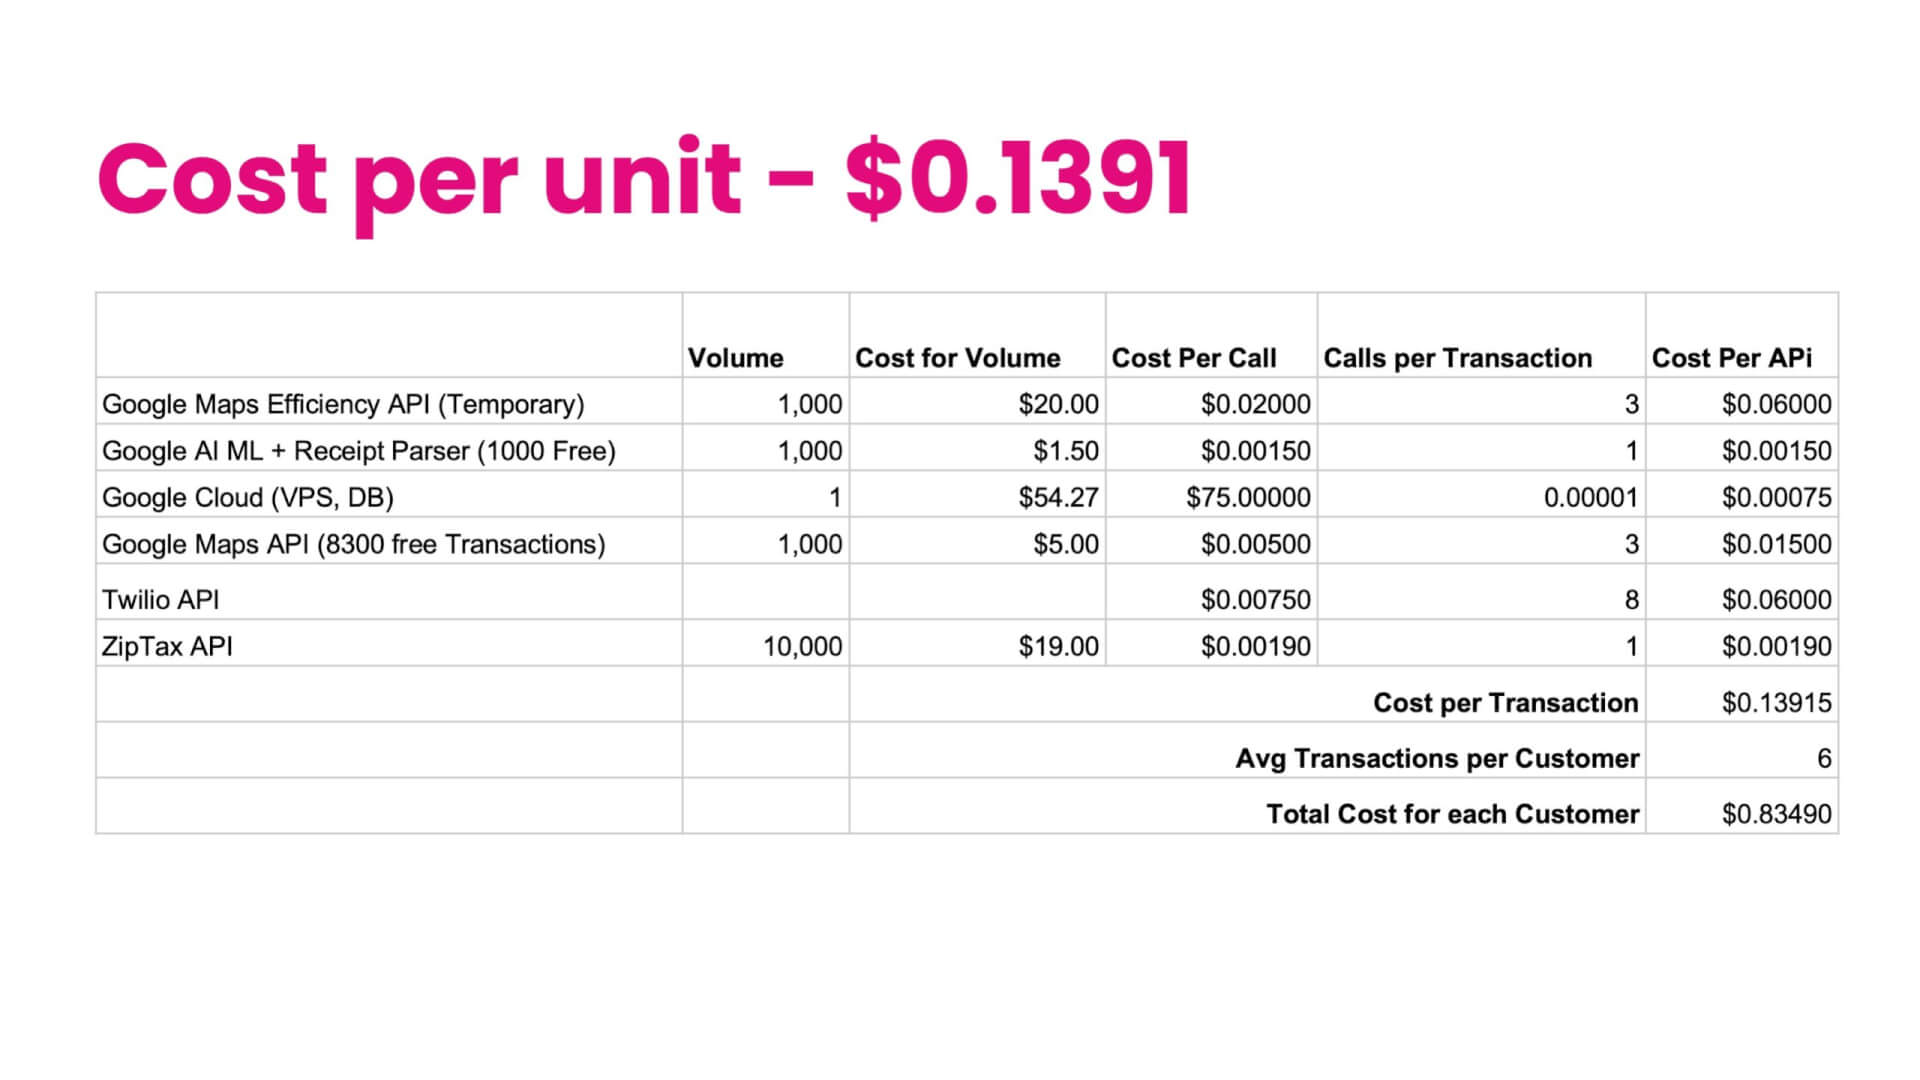 Cost per unit breakdown featuring, the Google API's for AI, Maps, Cloud. Also listed are Twillio and ZipTax